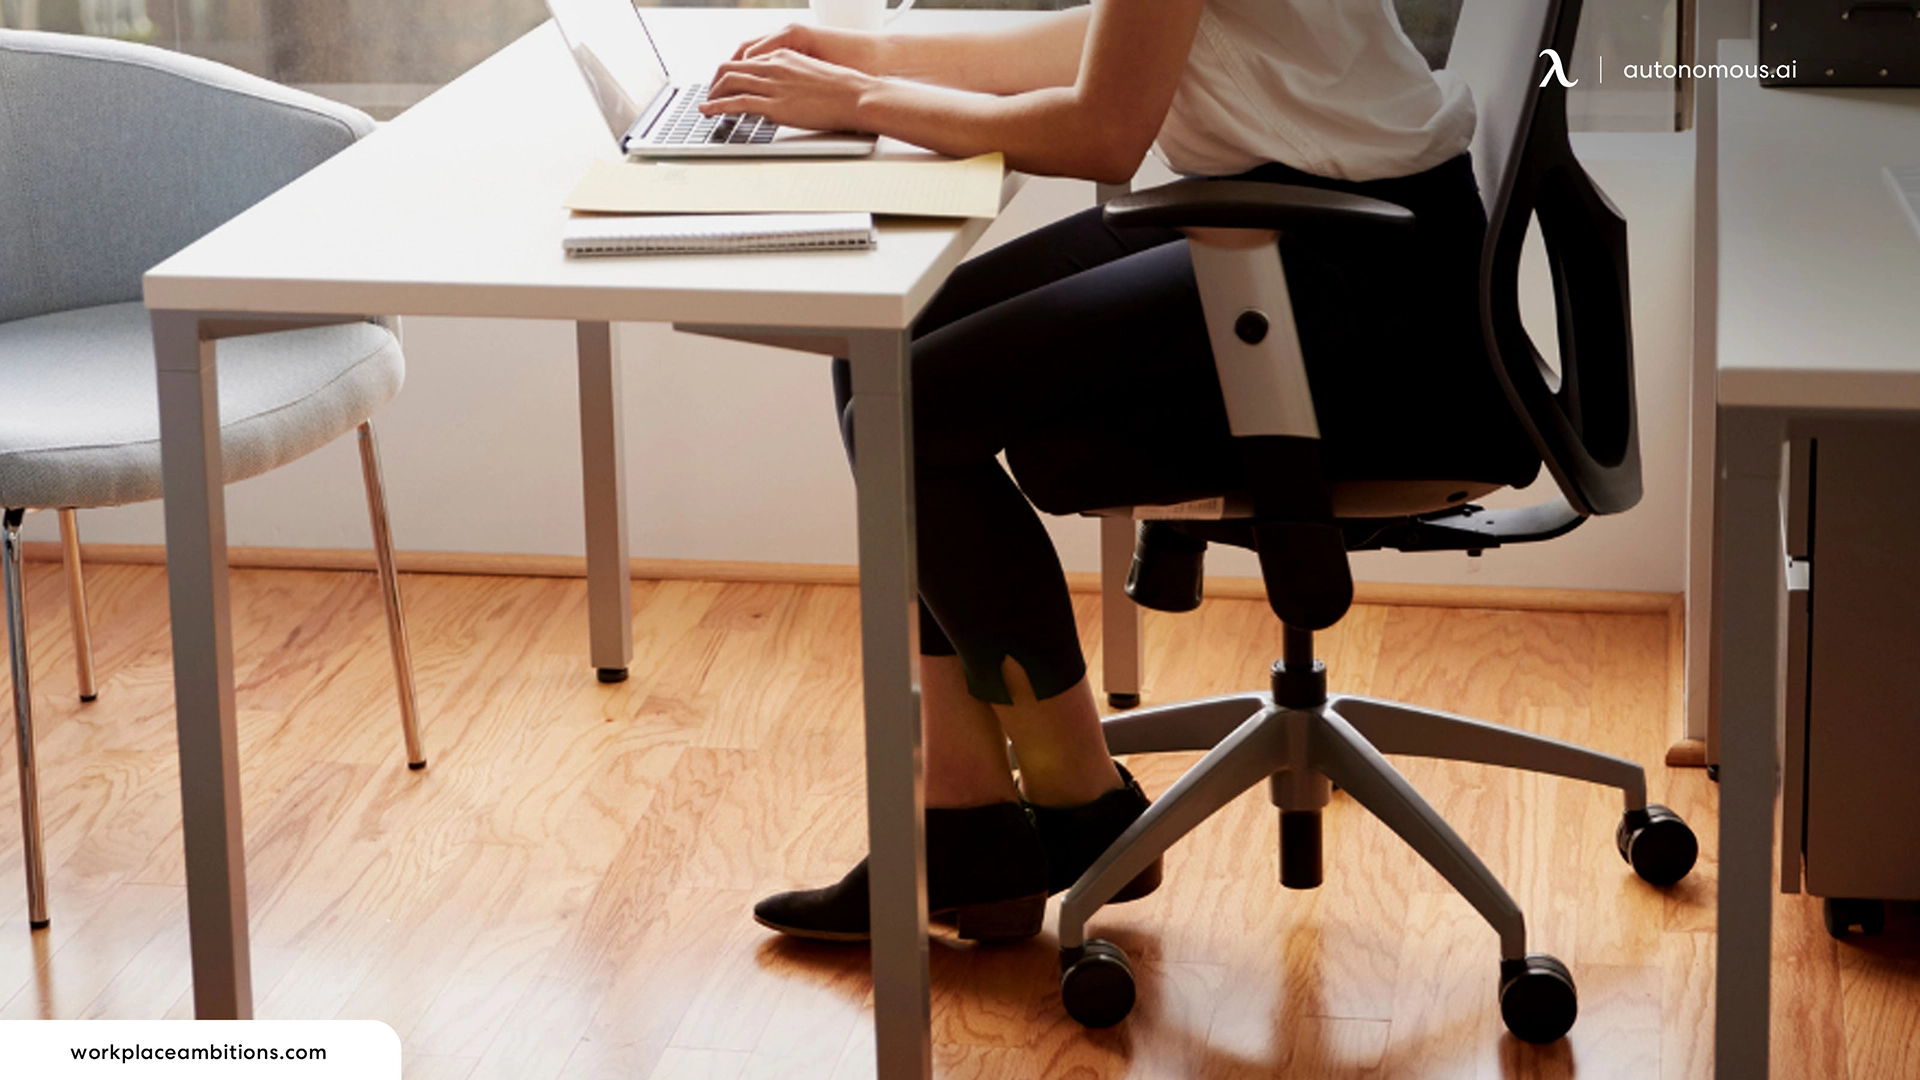 How To Prevent Feet Swelling While Sitting At Desk